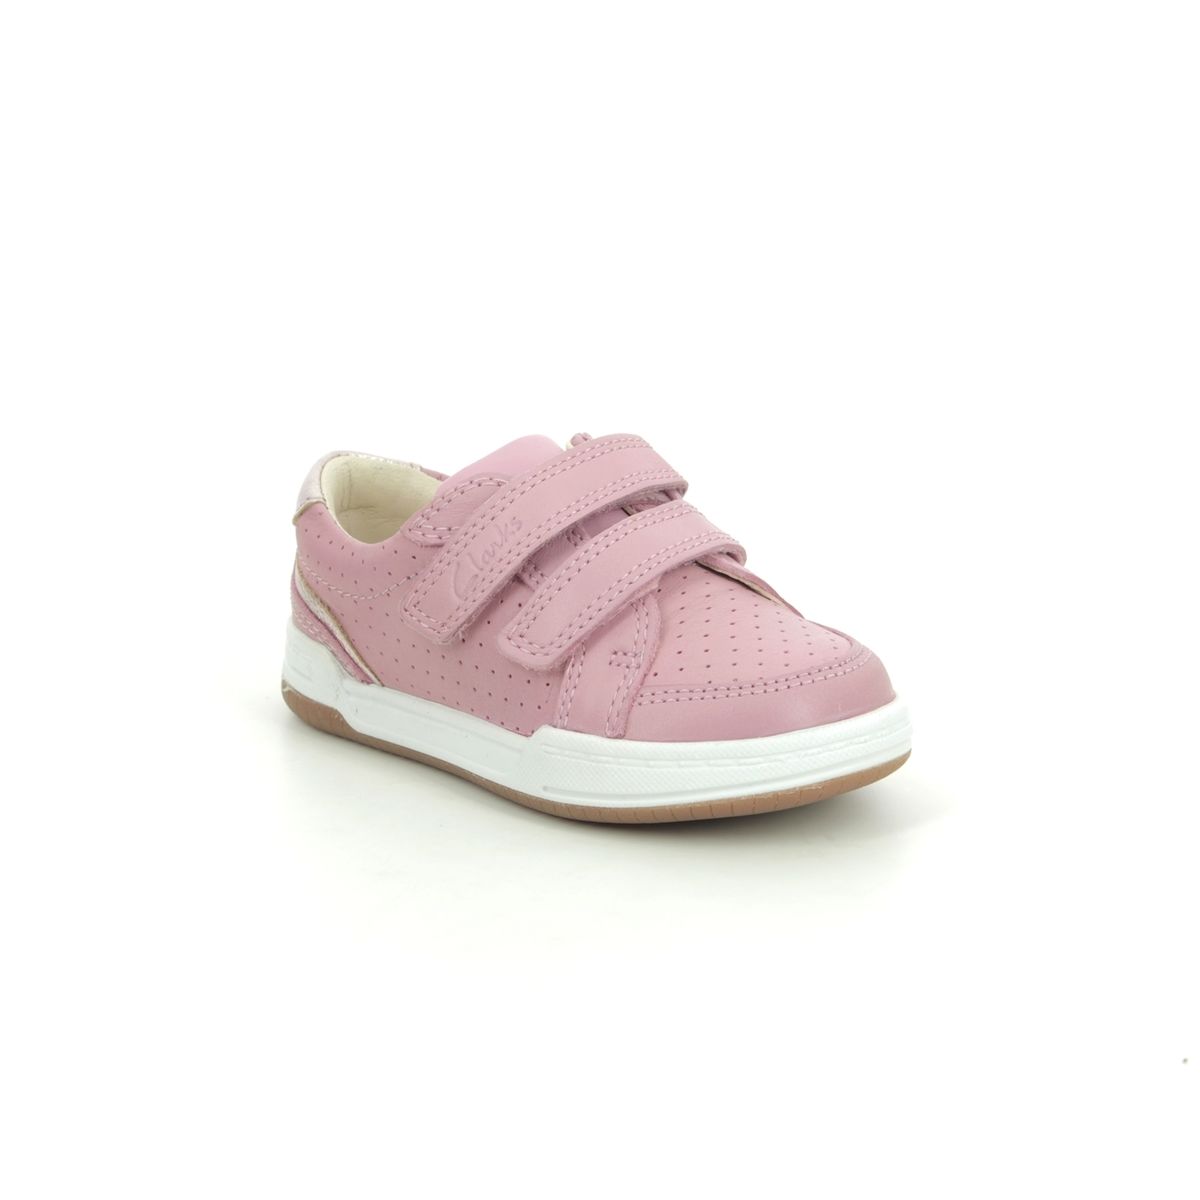 Clarks Fawn Solo T Pink Leather Kids First And Toddler 589896F In Size 4.5 In Plain Pink Leather F Width Fitting Regular Fit For kids